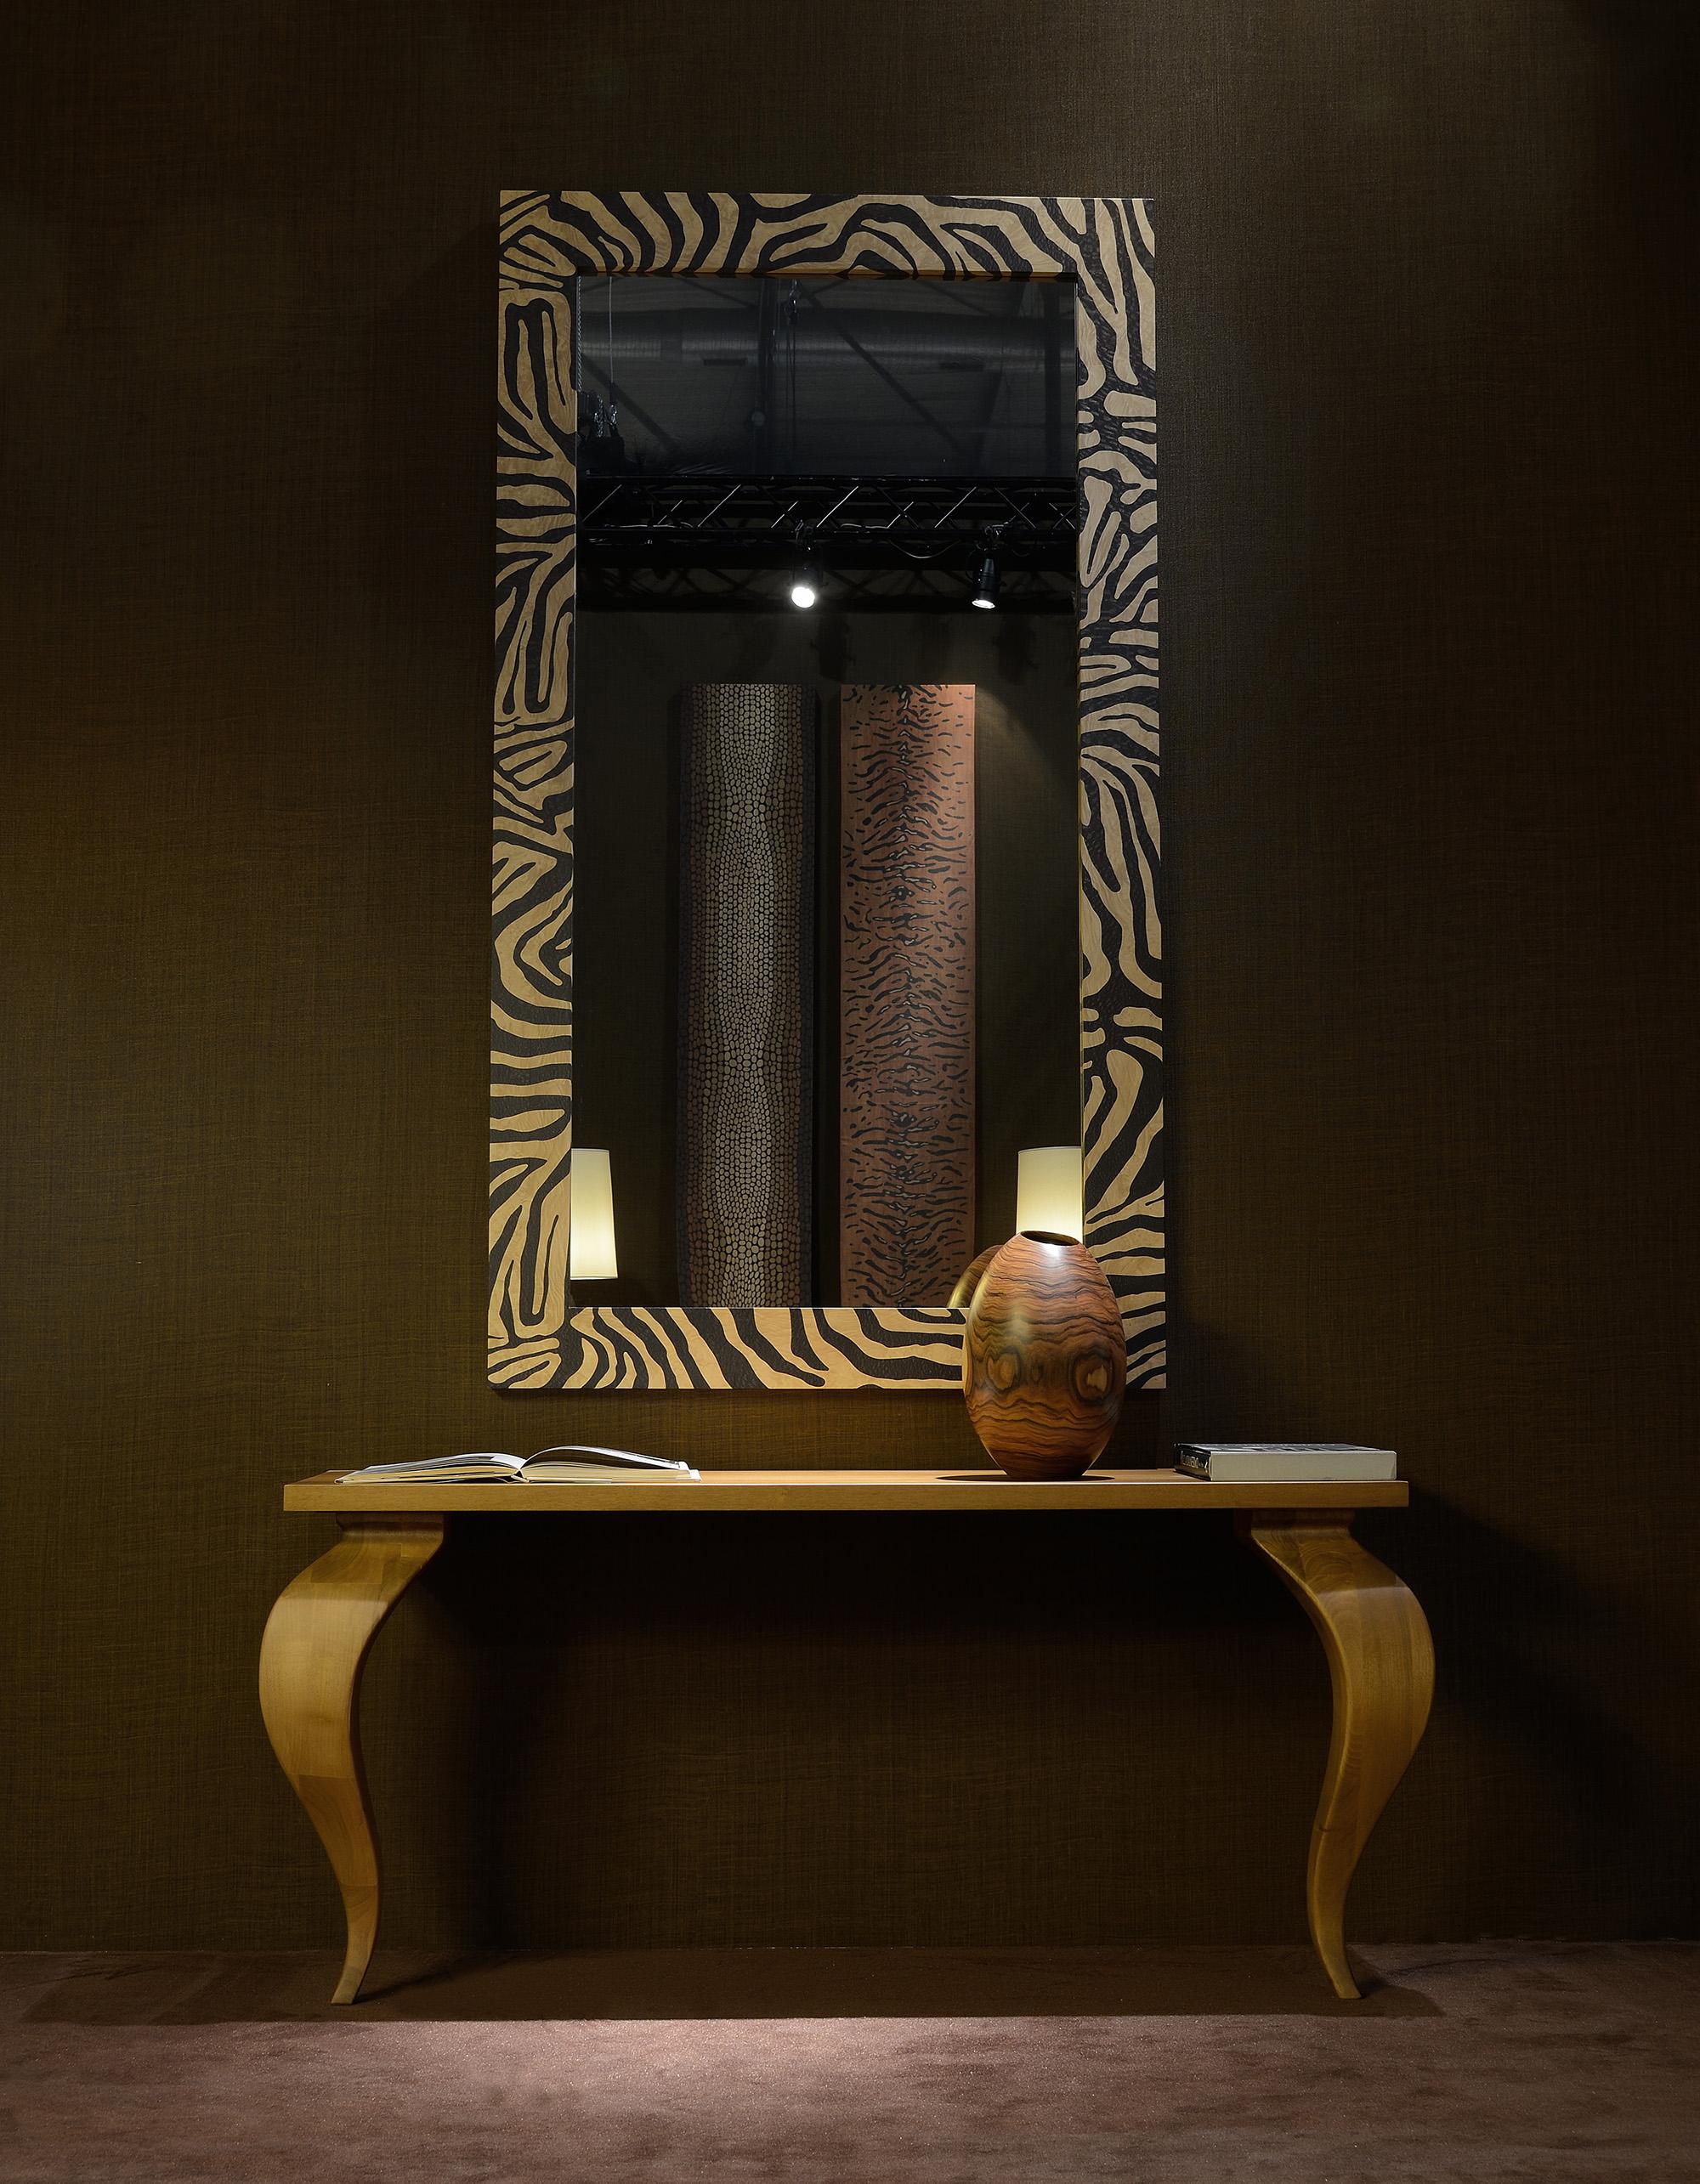 This mirror features a frame crafted from solid wood with a striking zebra-striped inlay, adding a touch of the wild to your living space. The Zebra finish highlights the intricate pattern, creating a statement piece that seamlessly blends organic